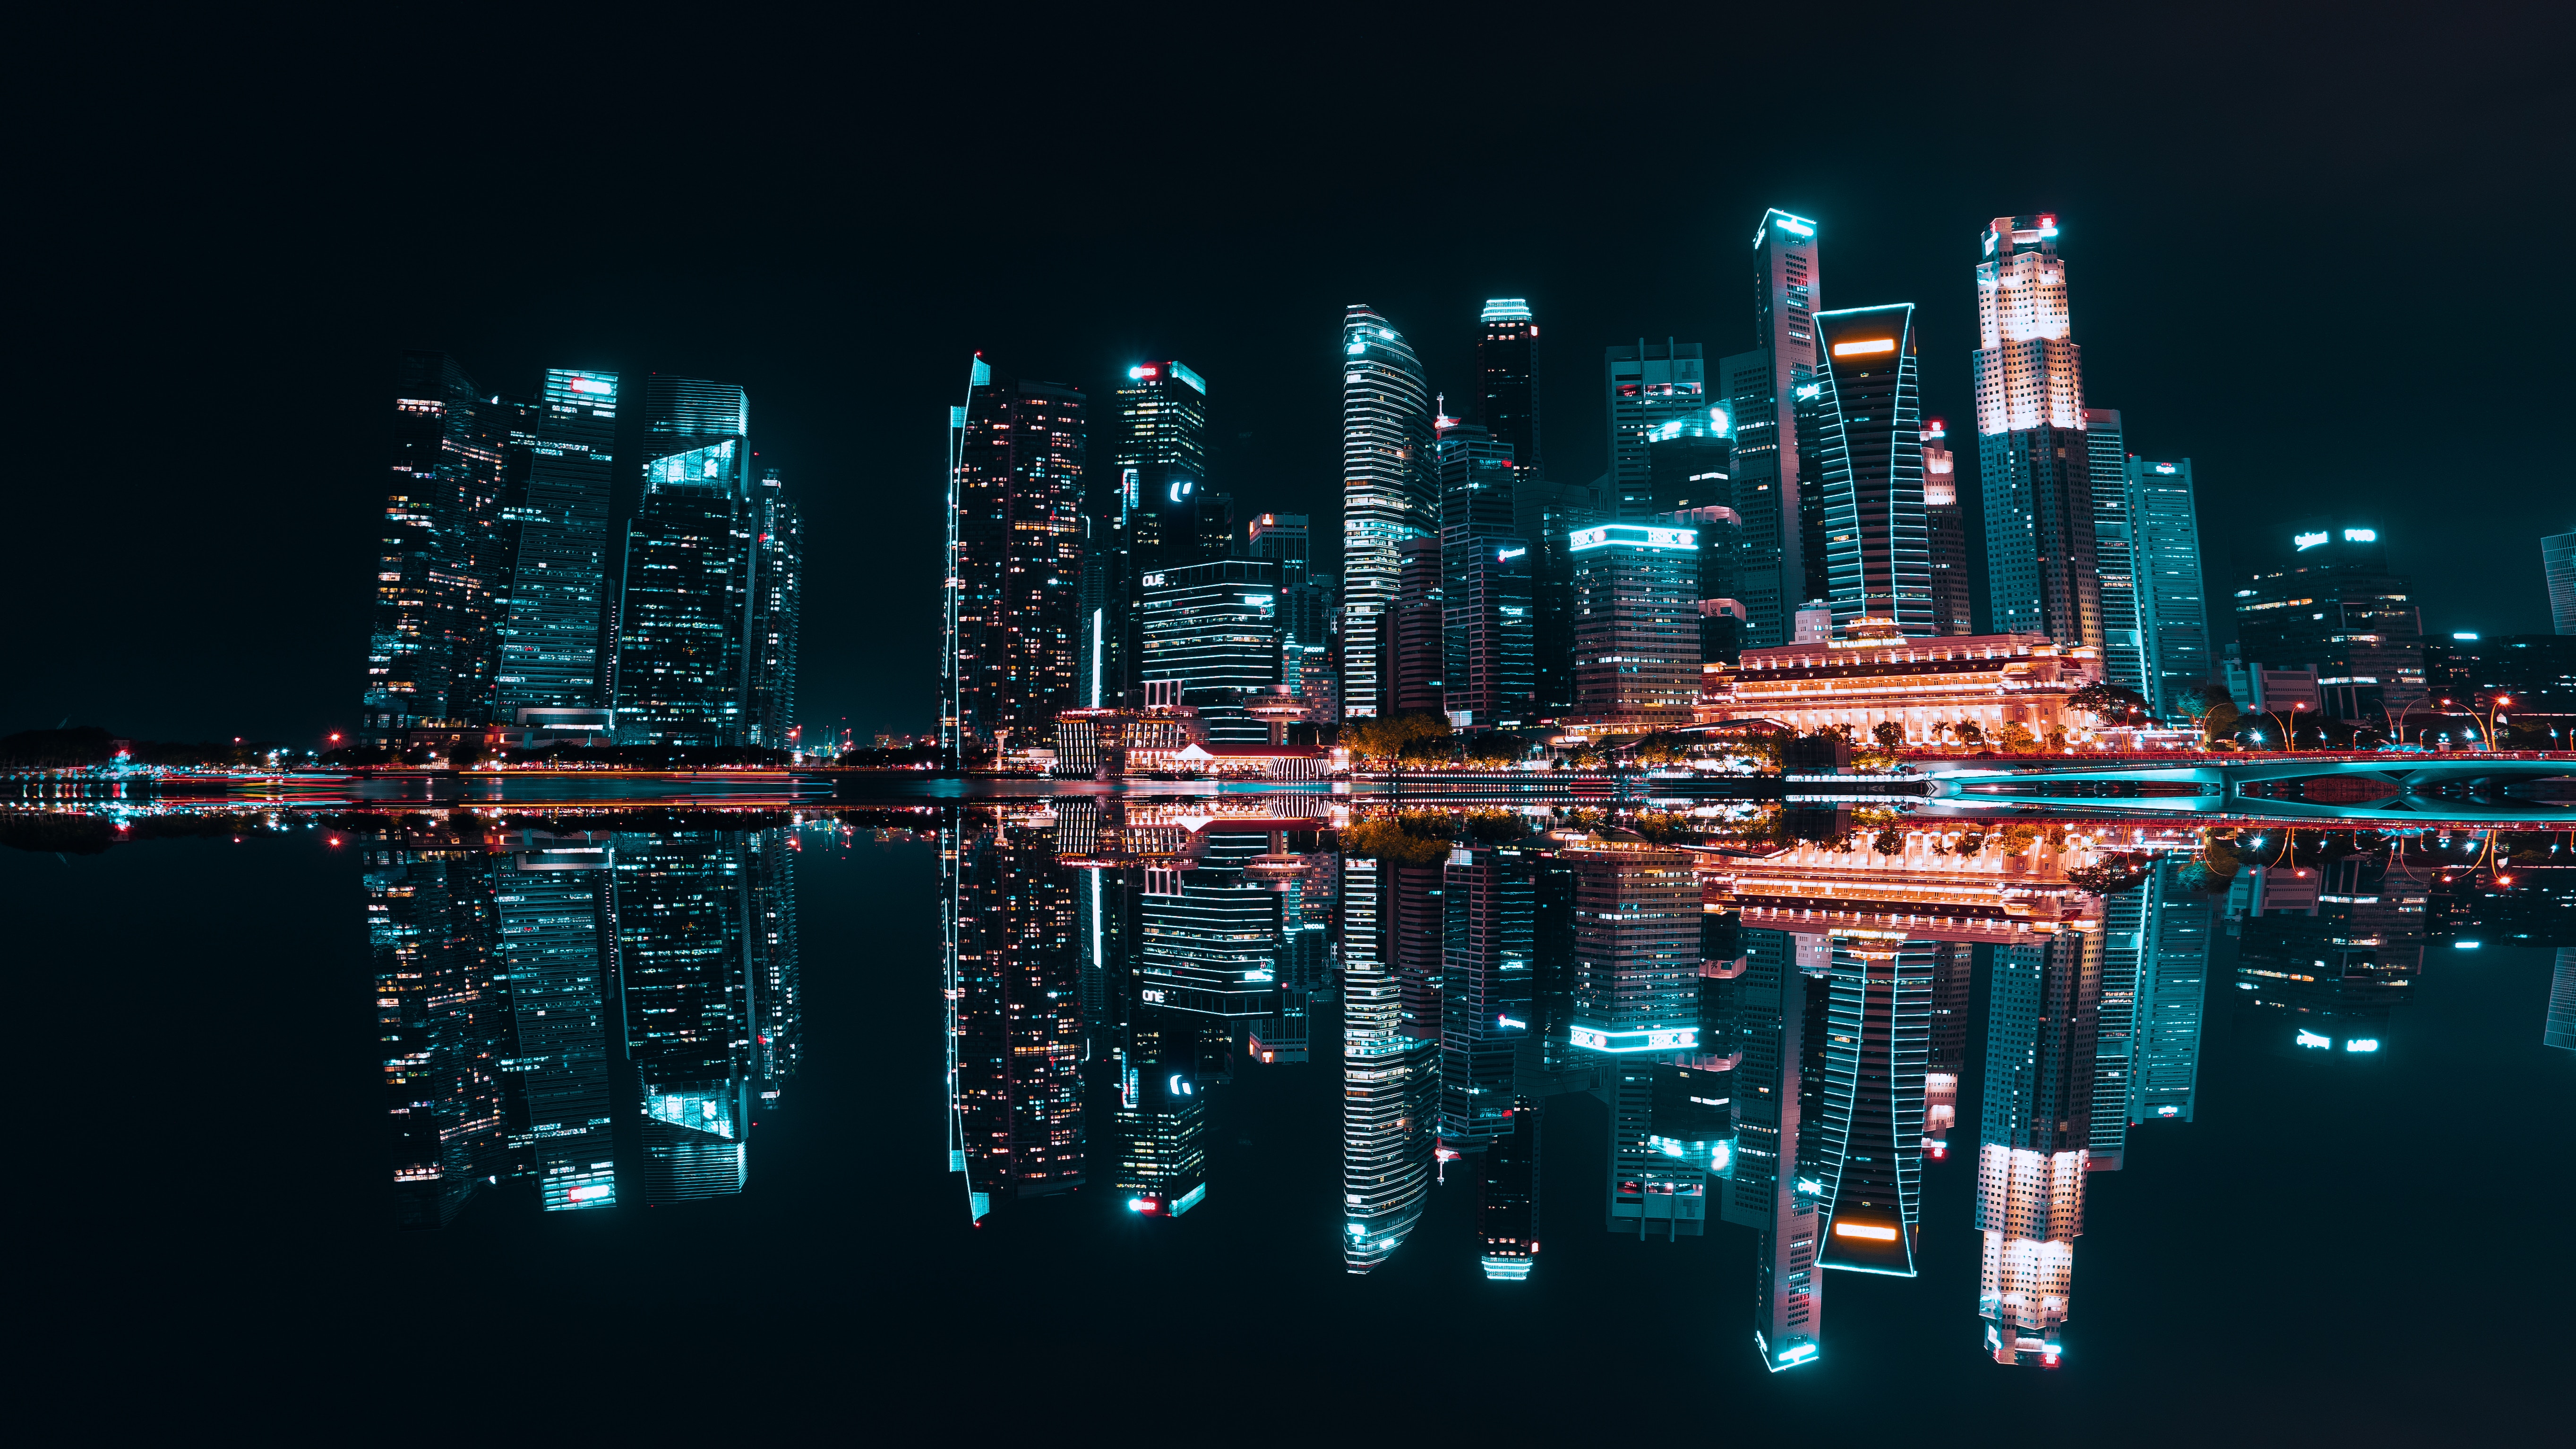 illumination, night city, cities, building, lake, reflection, skyscrapers, backlight, electricity